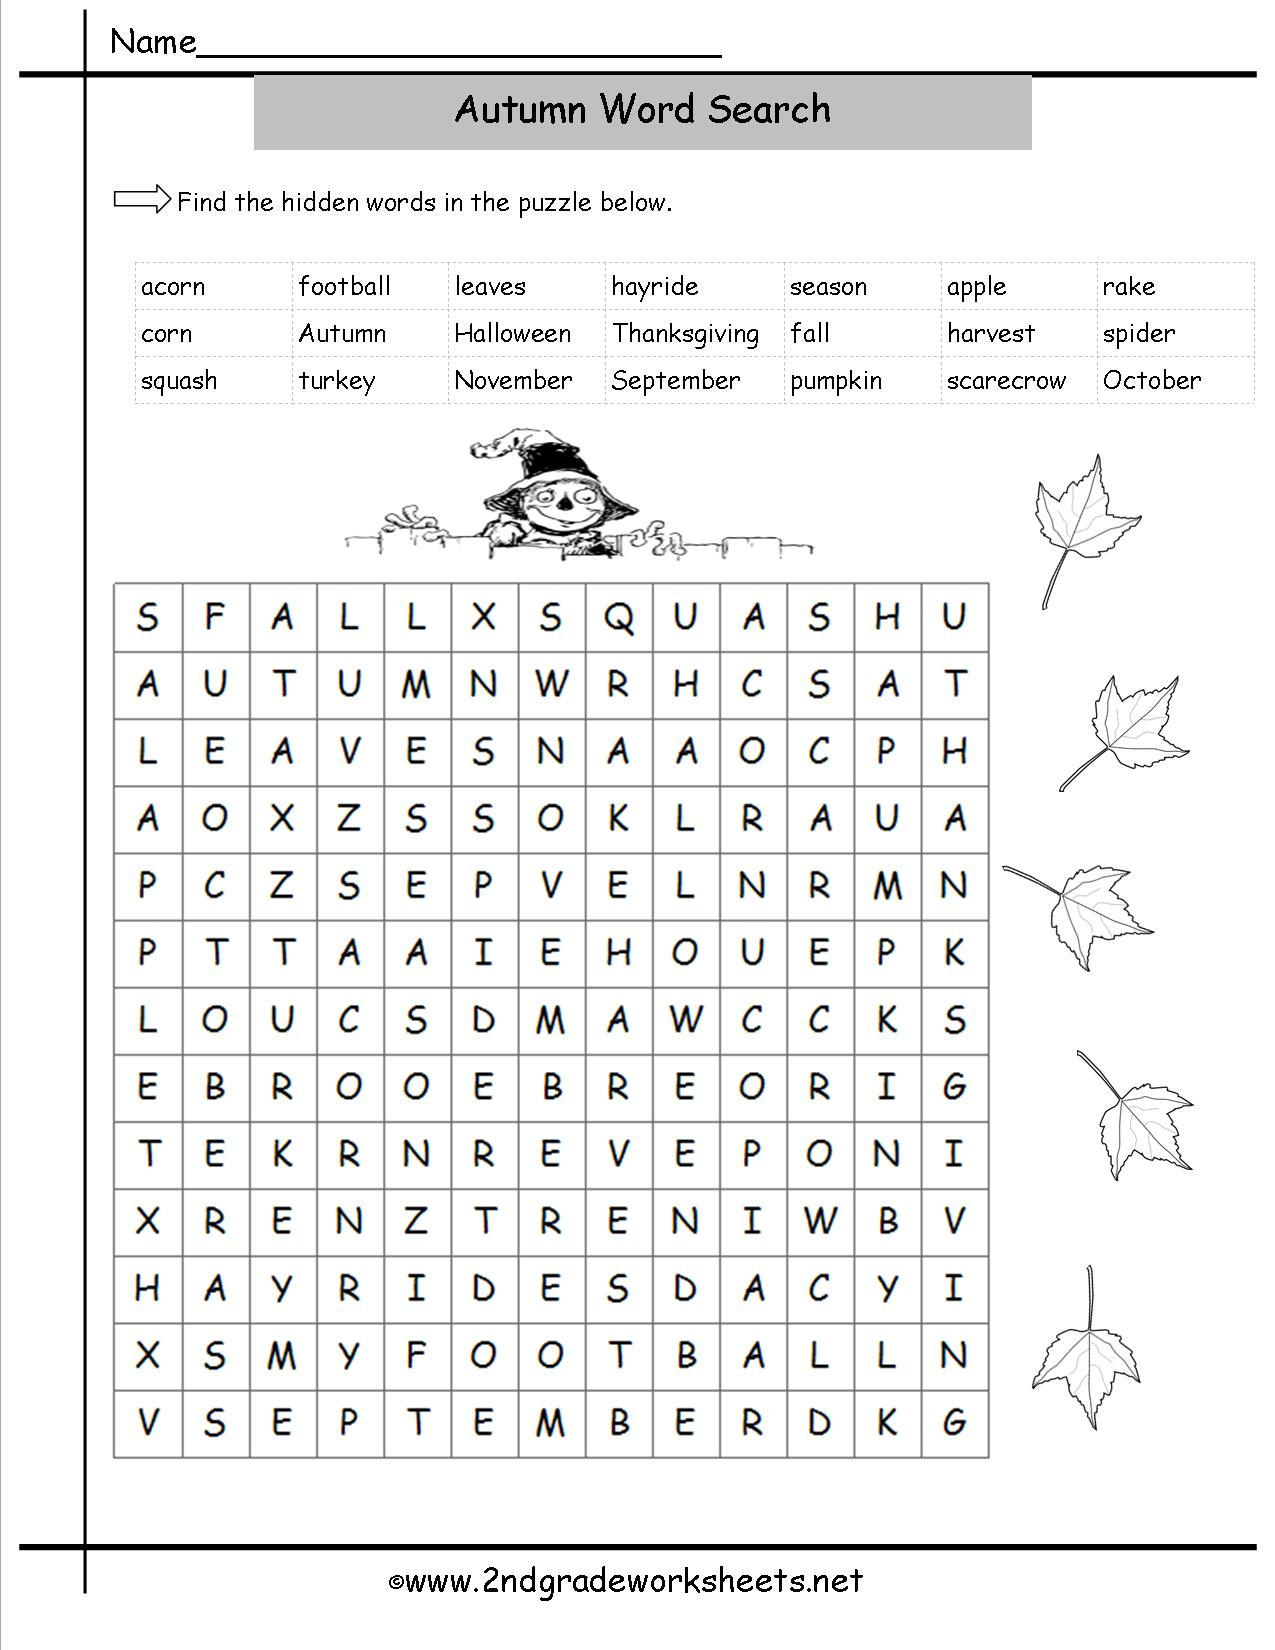 Autumn Theme Worksheets And Printouts. | Printable Fall Worksheets